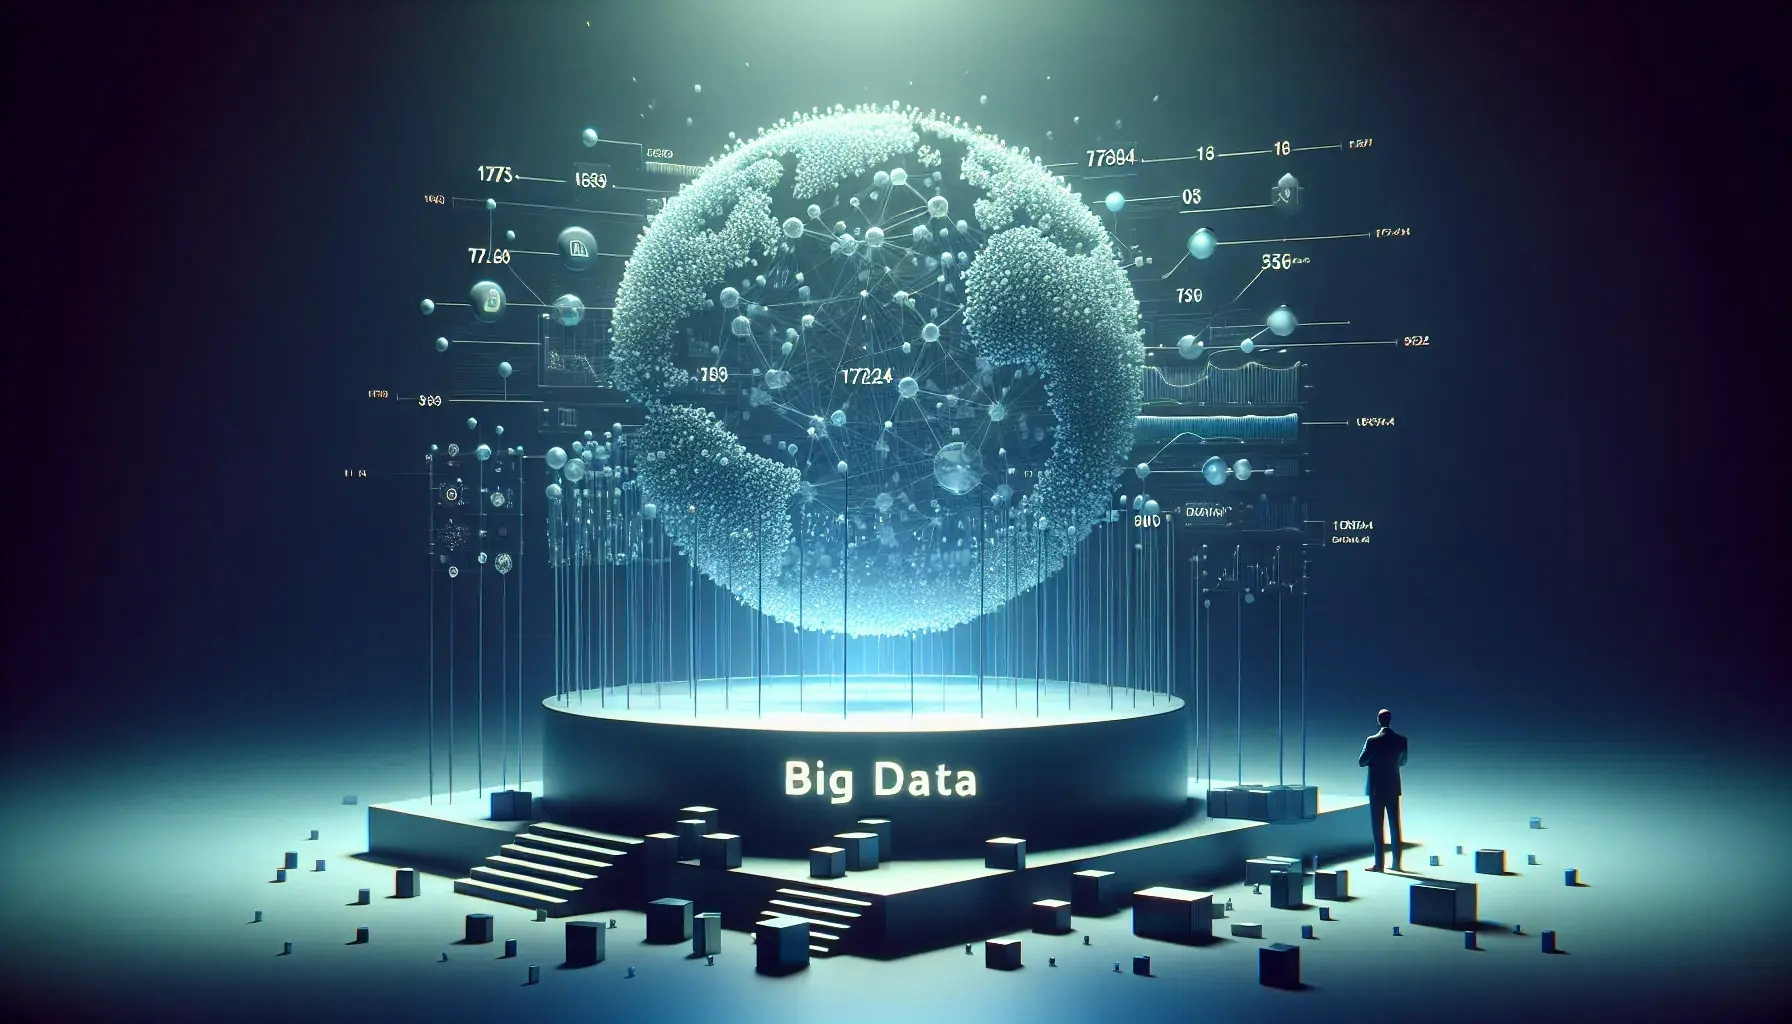 real-life big data interview experiences and takeaways